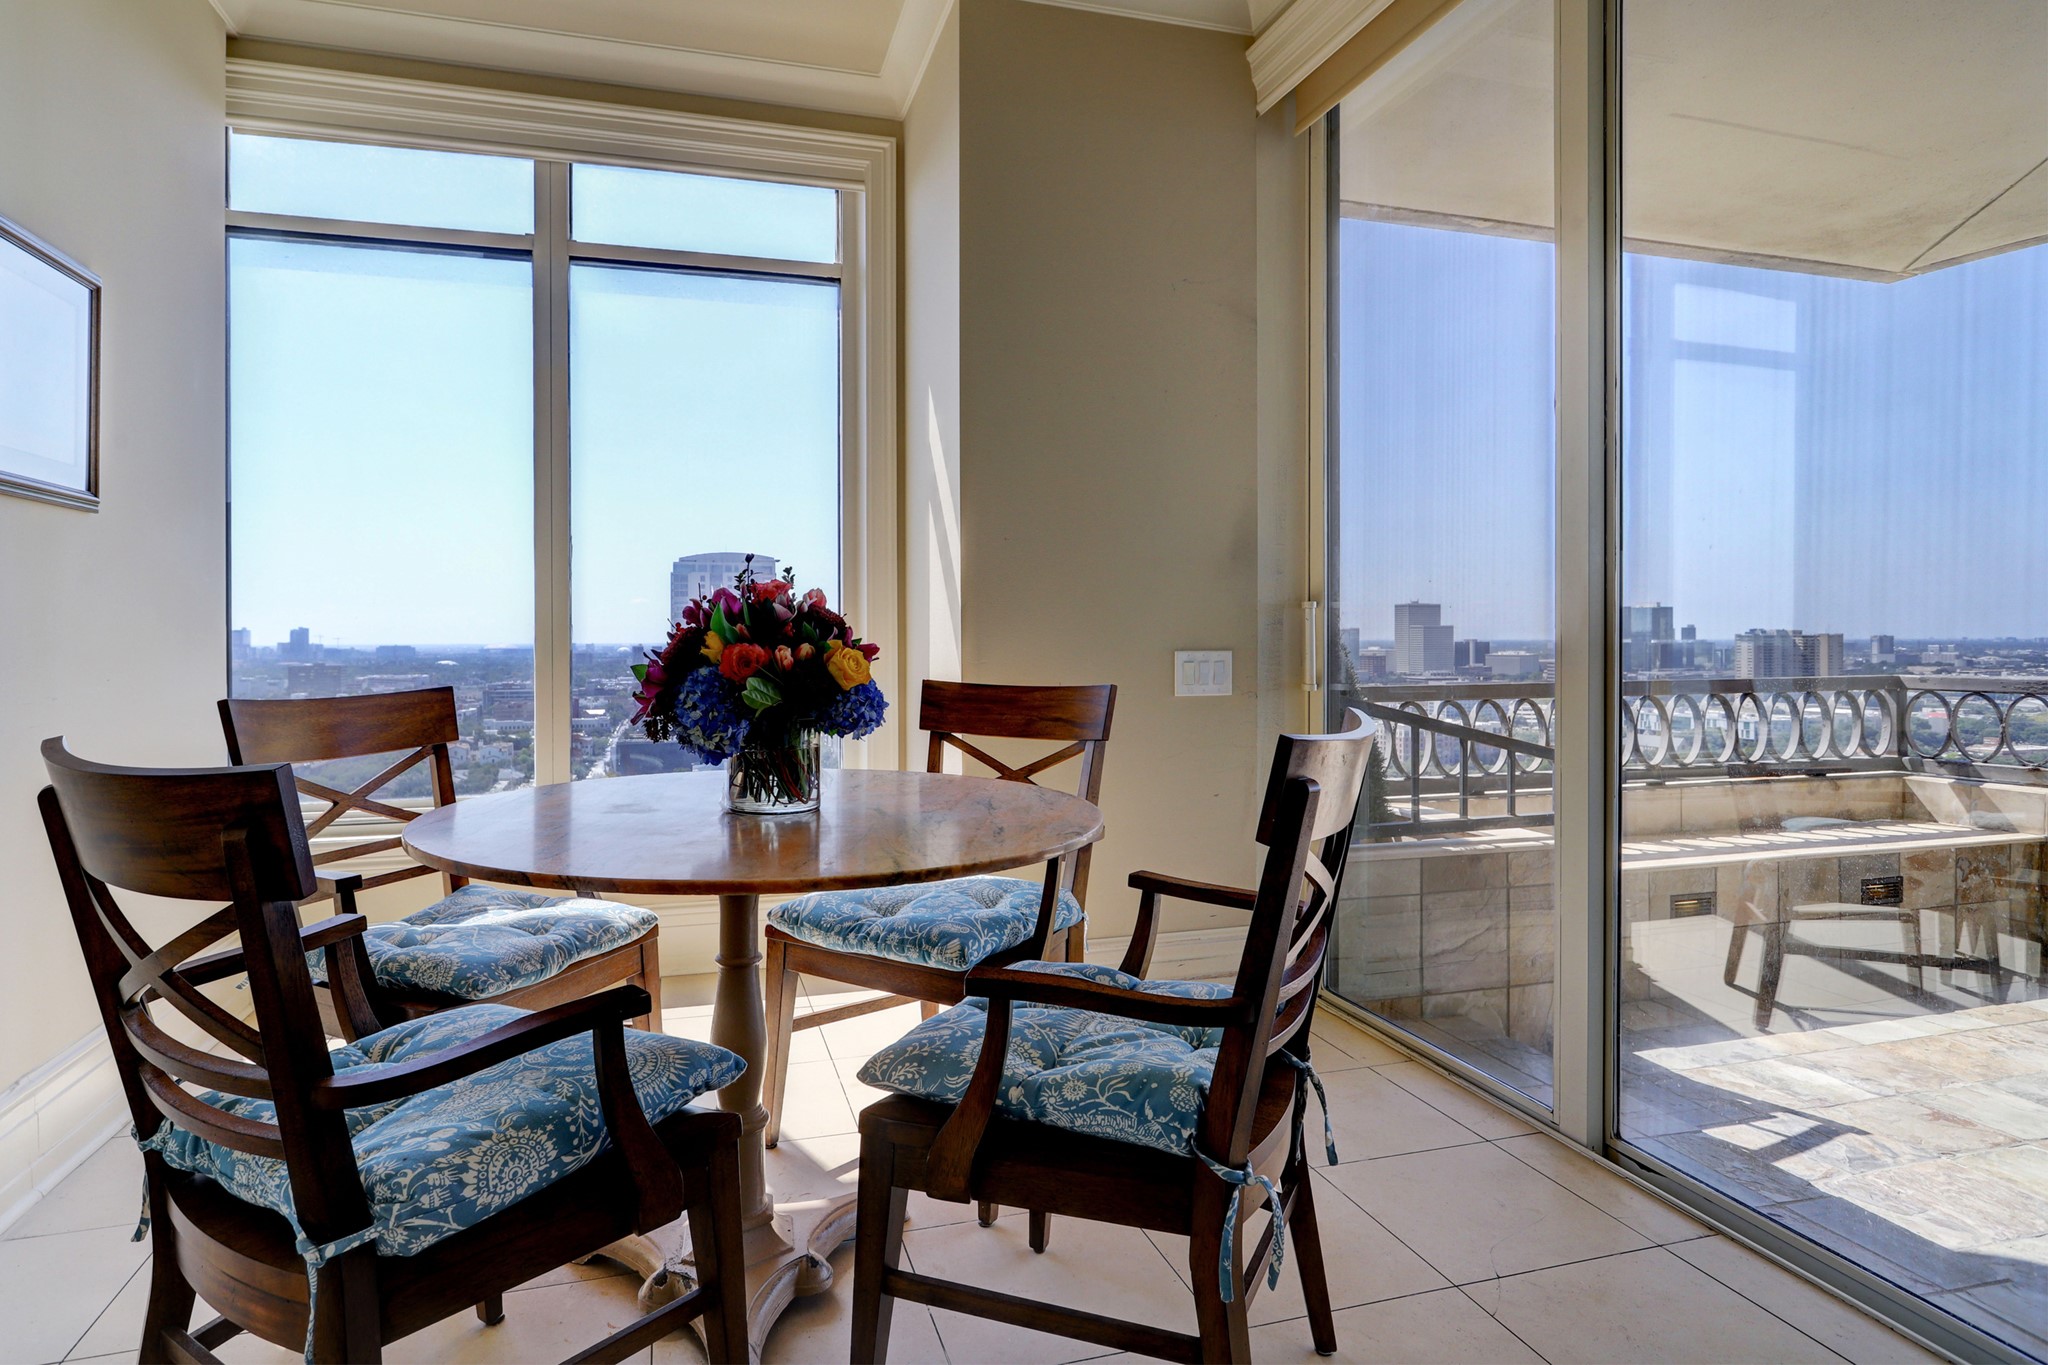 The breakfast room opens up to the balcony.